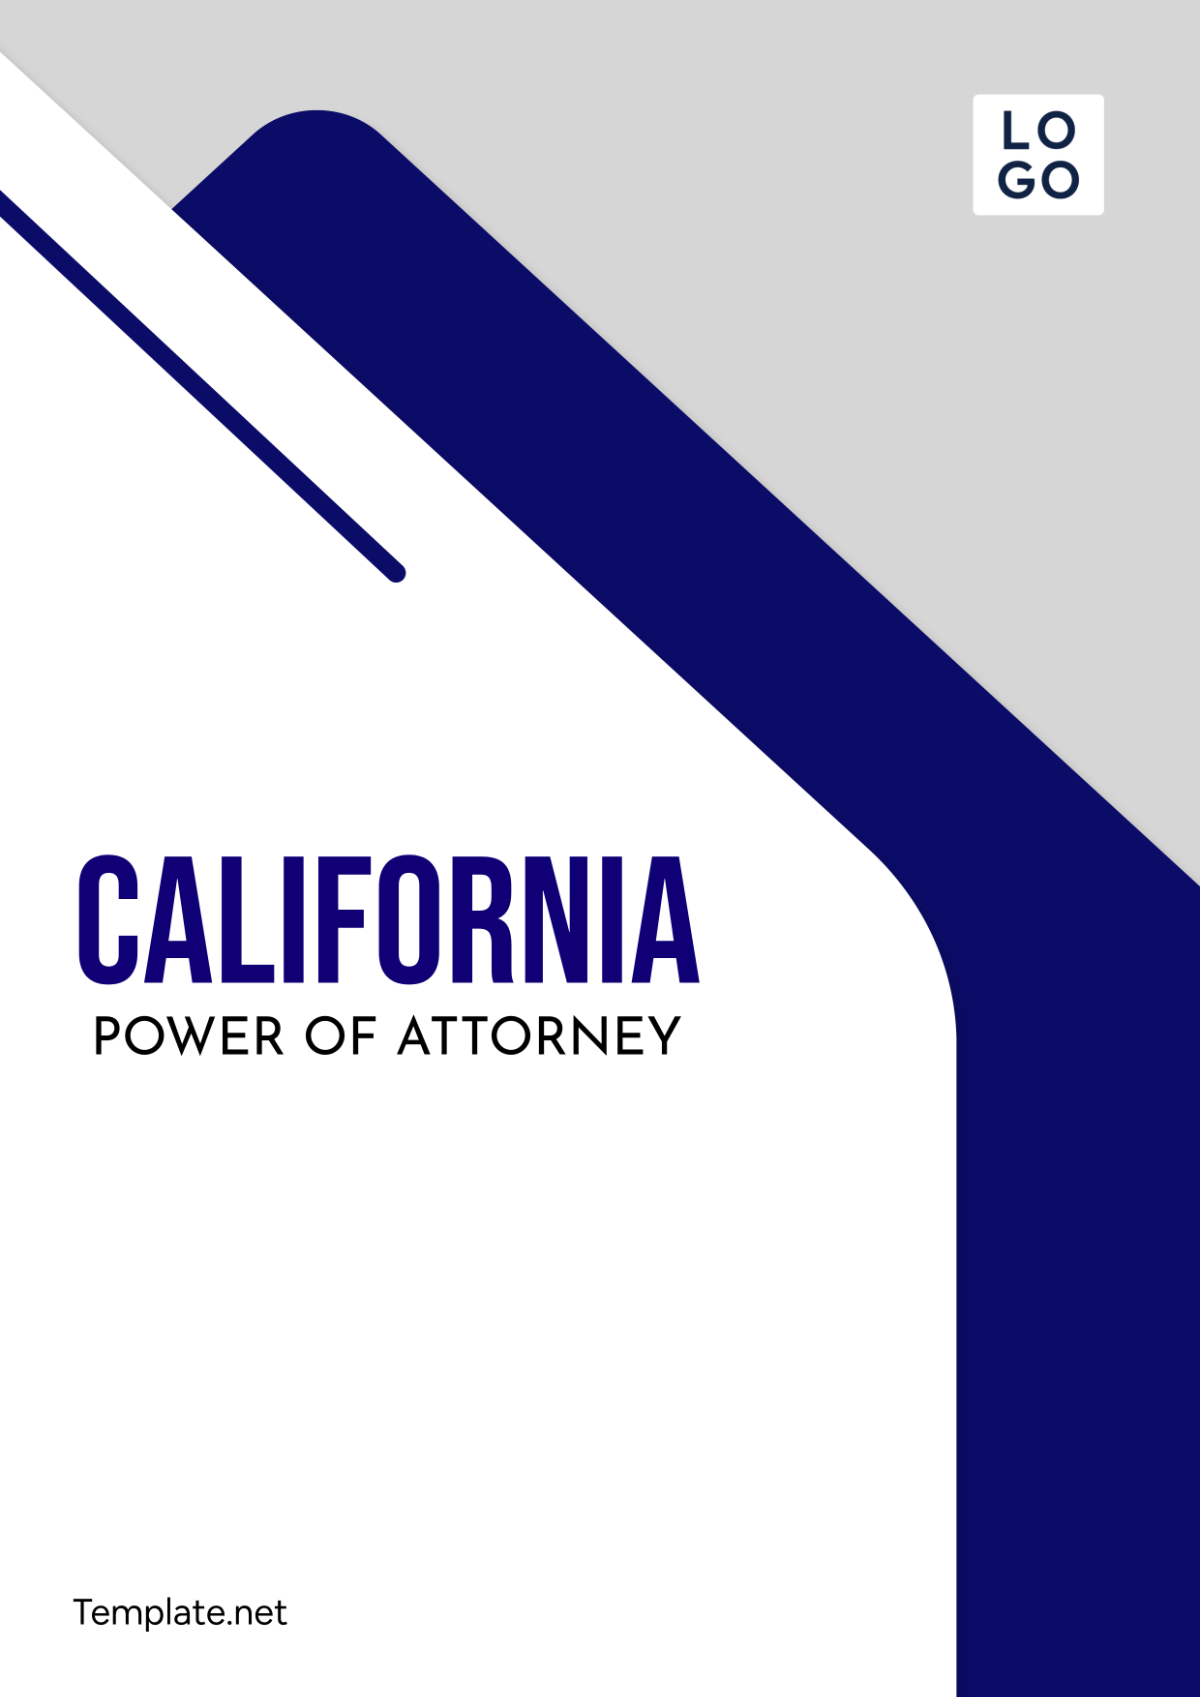 California Power of Attorney Template